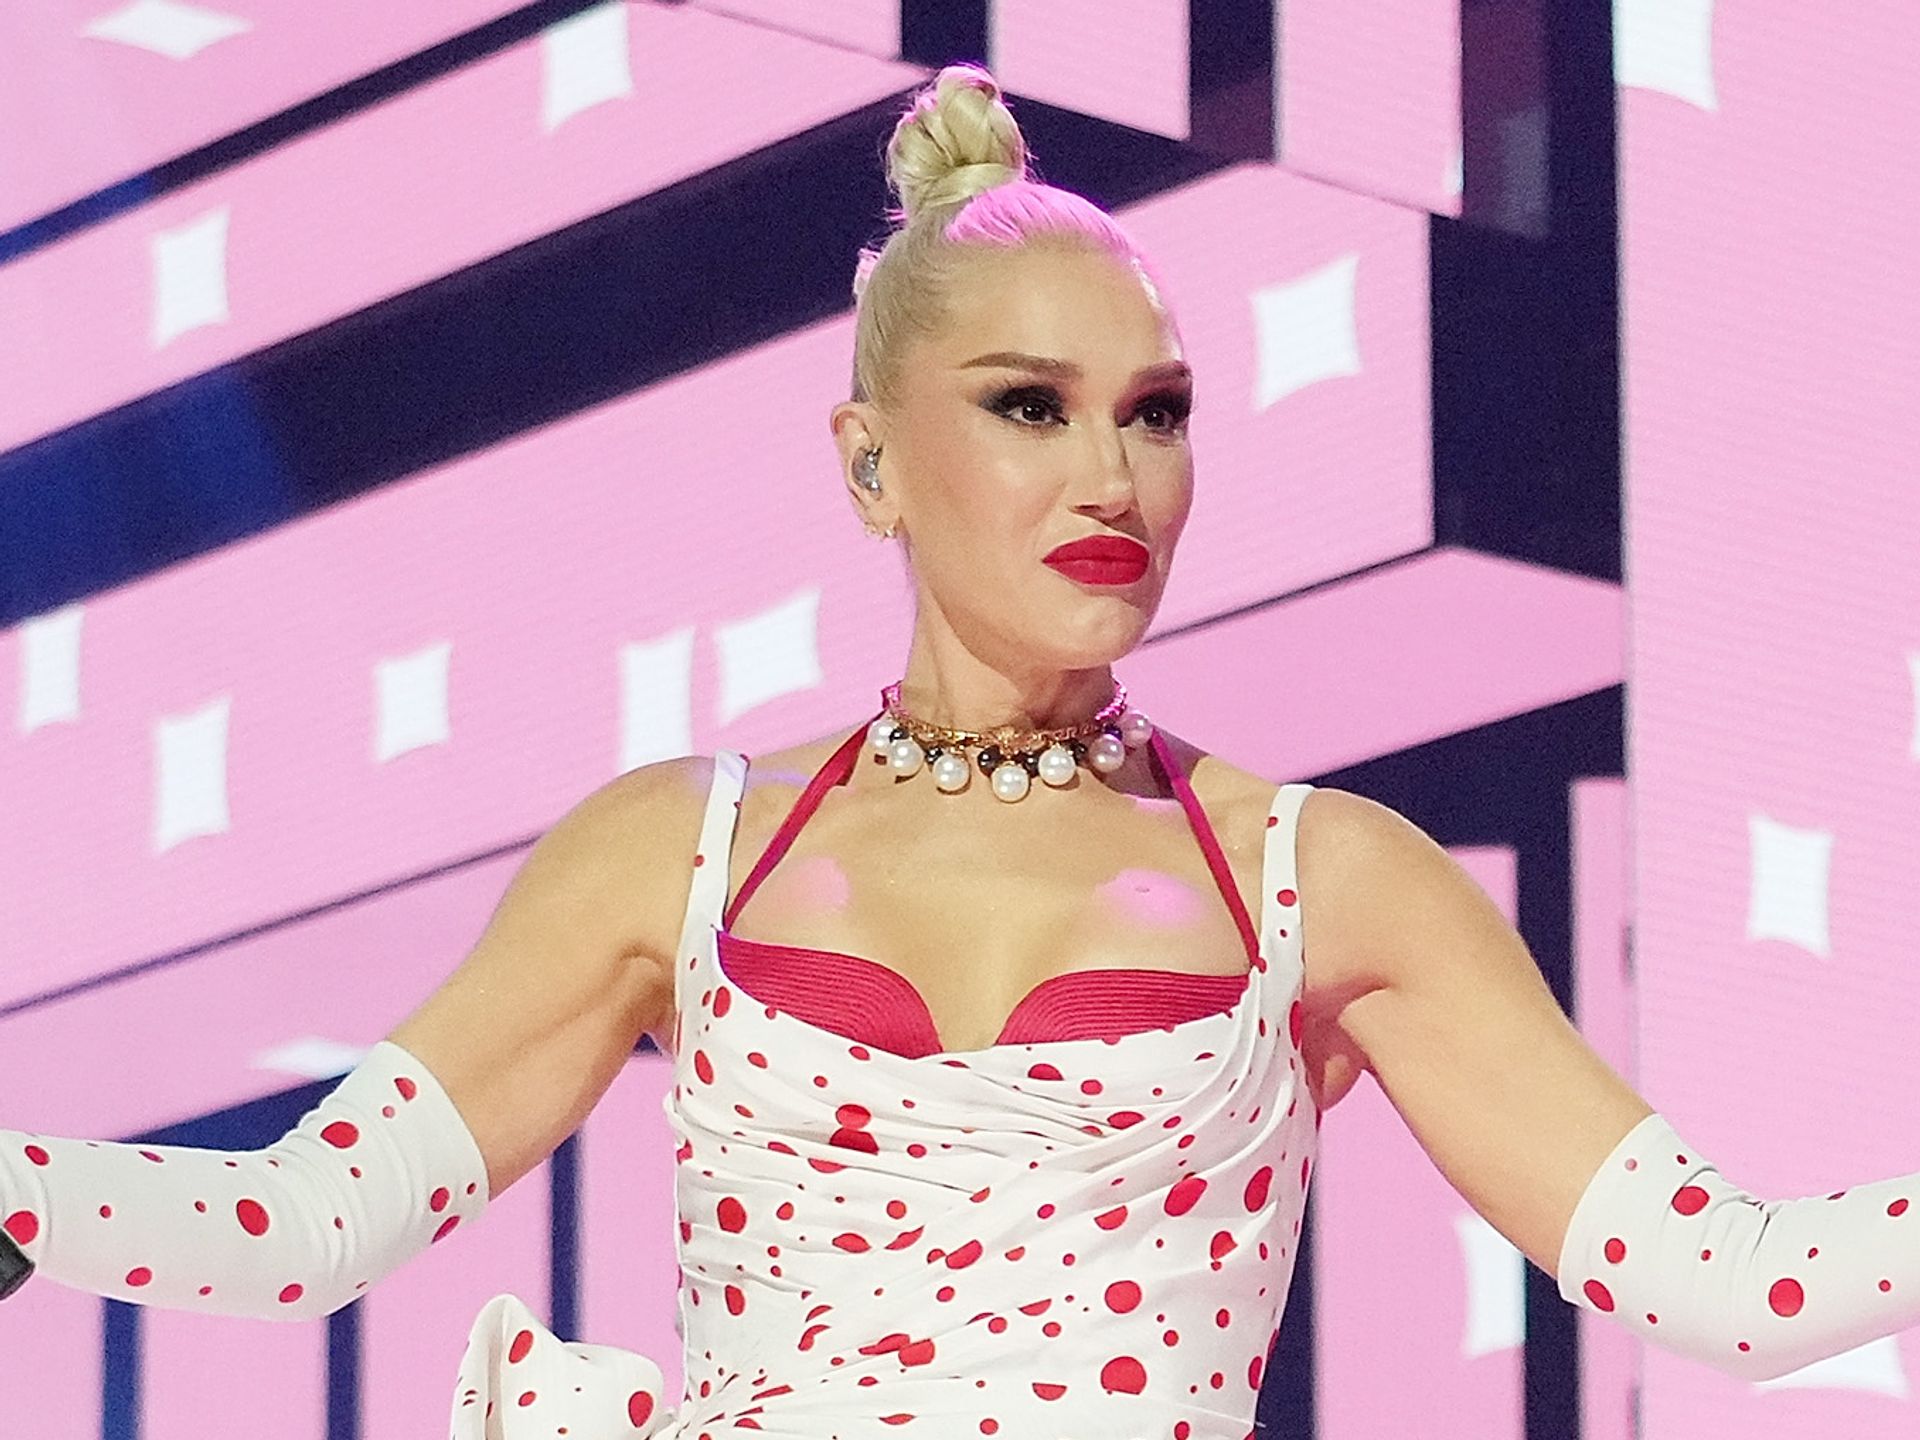 Gwen Stefani cuts a fashionable figure in pink dress and tights in